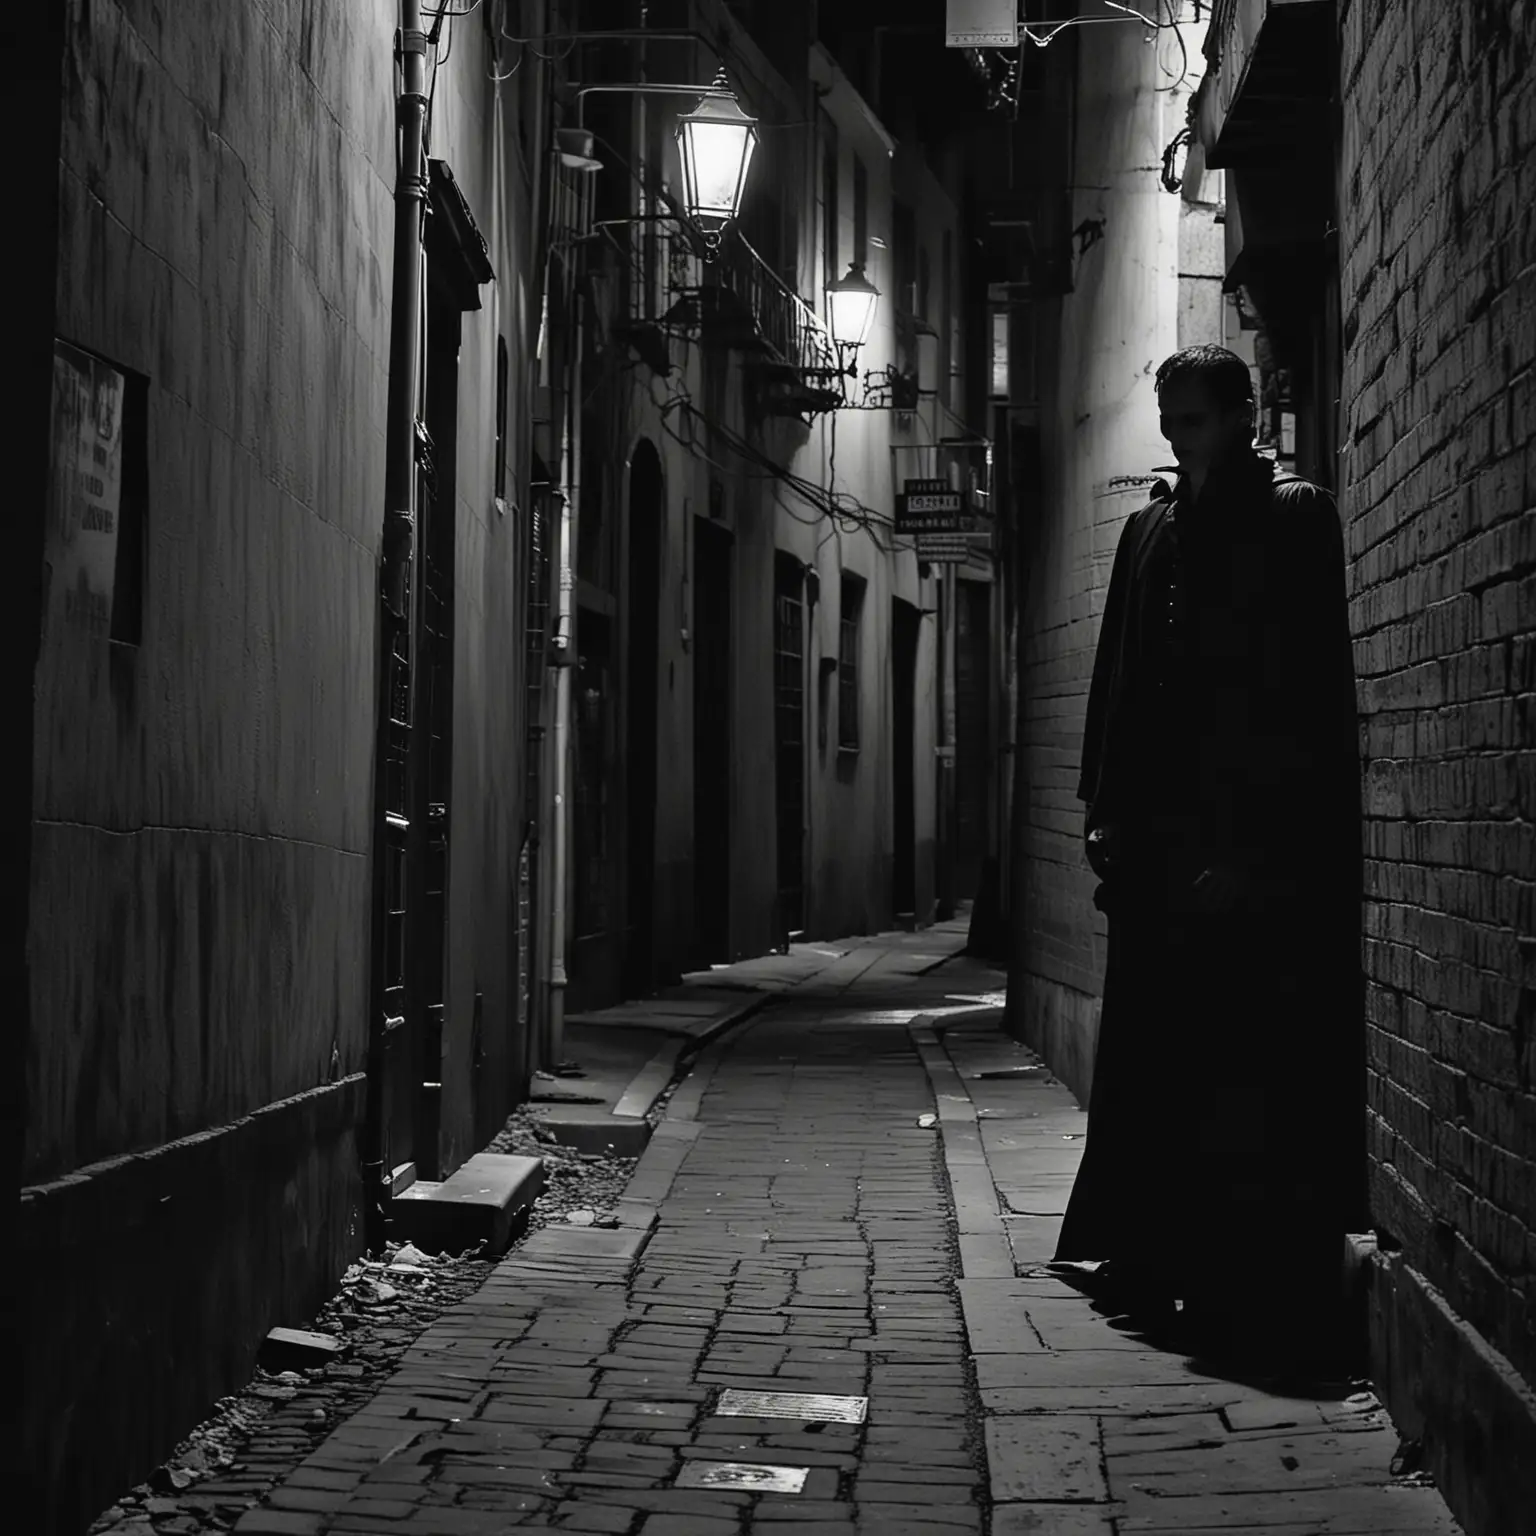  a vampire, lurking in the shadows of a streeet alley  waiting to pounce.